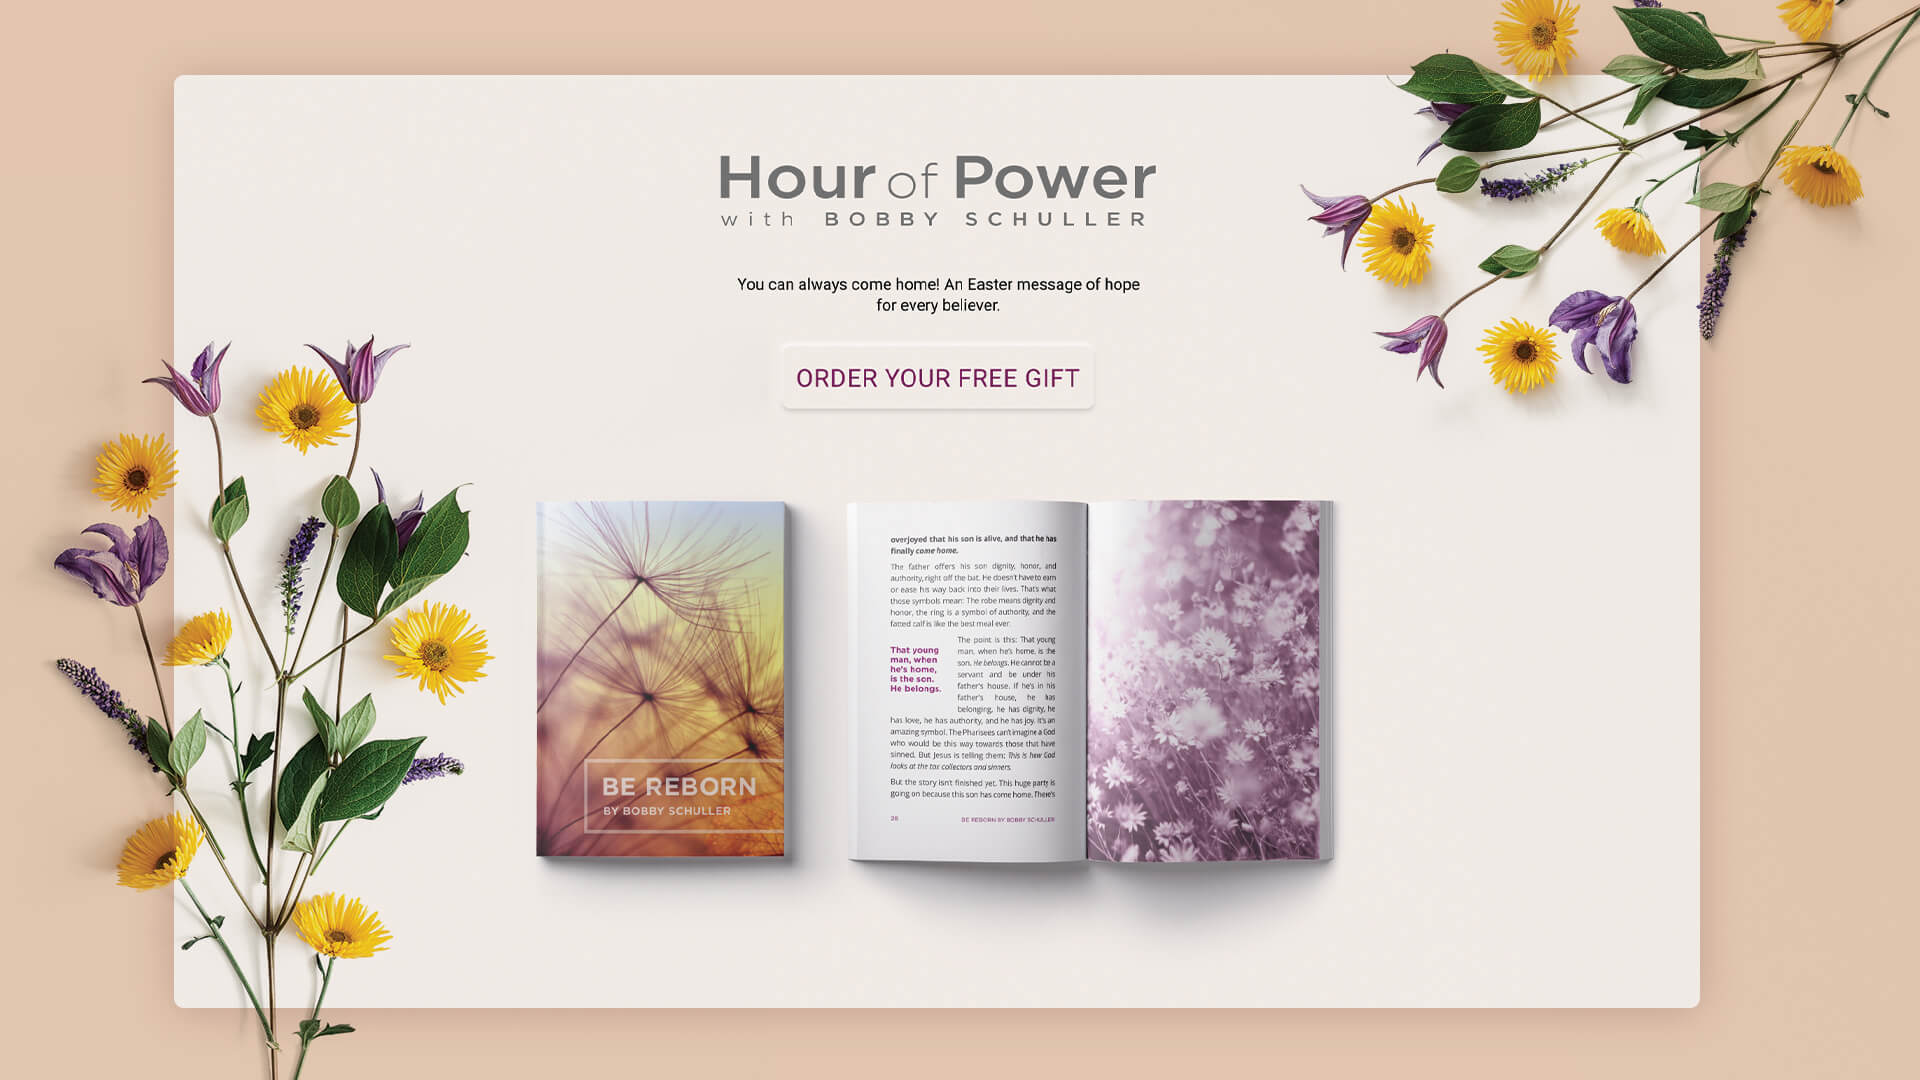 Hour Of Power - Be Reborn Campaing Social Media and Google Ads